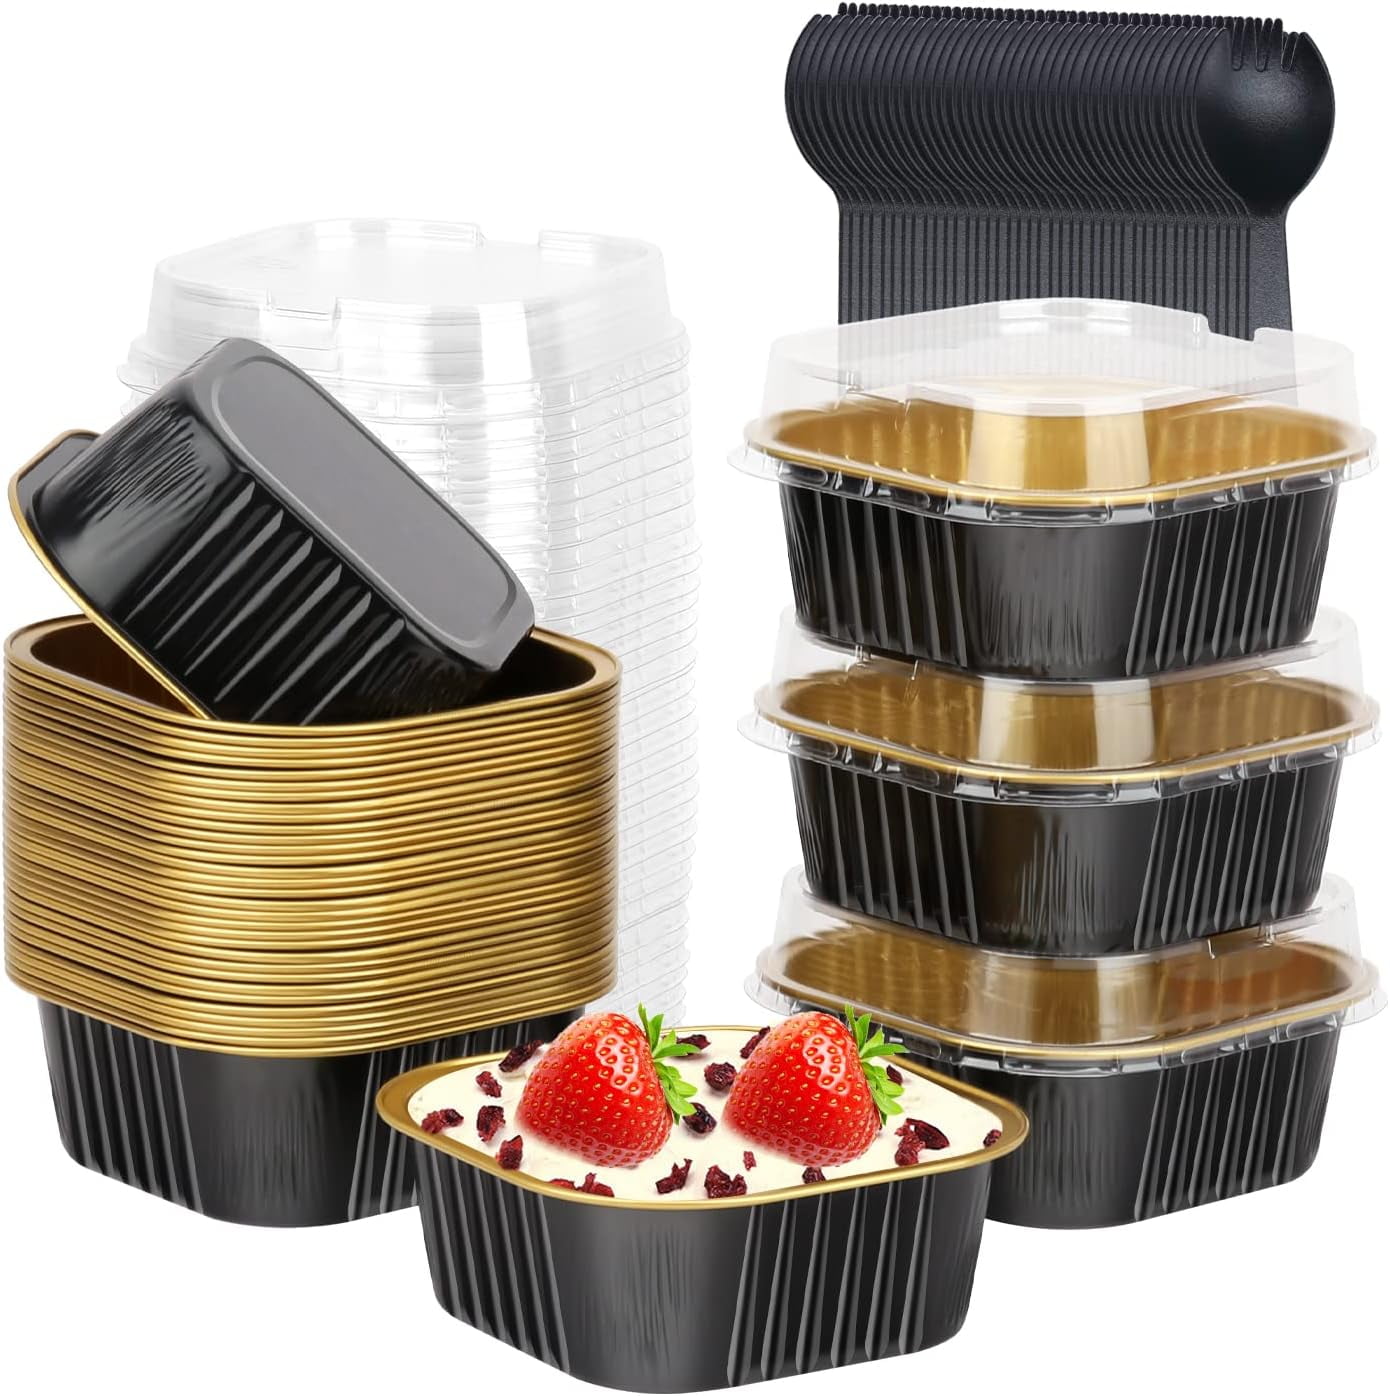 Findful Mini Cake Pans With Lids (10oz,40 Pack) Aluminum Foil Square  Cupcake Liners Brownie Baking Cups,Disposable 4”x4” Large Cupcake Pan,Jumbo